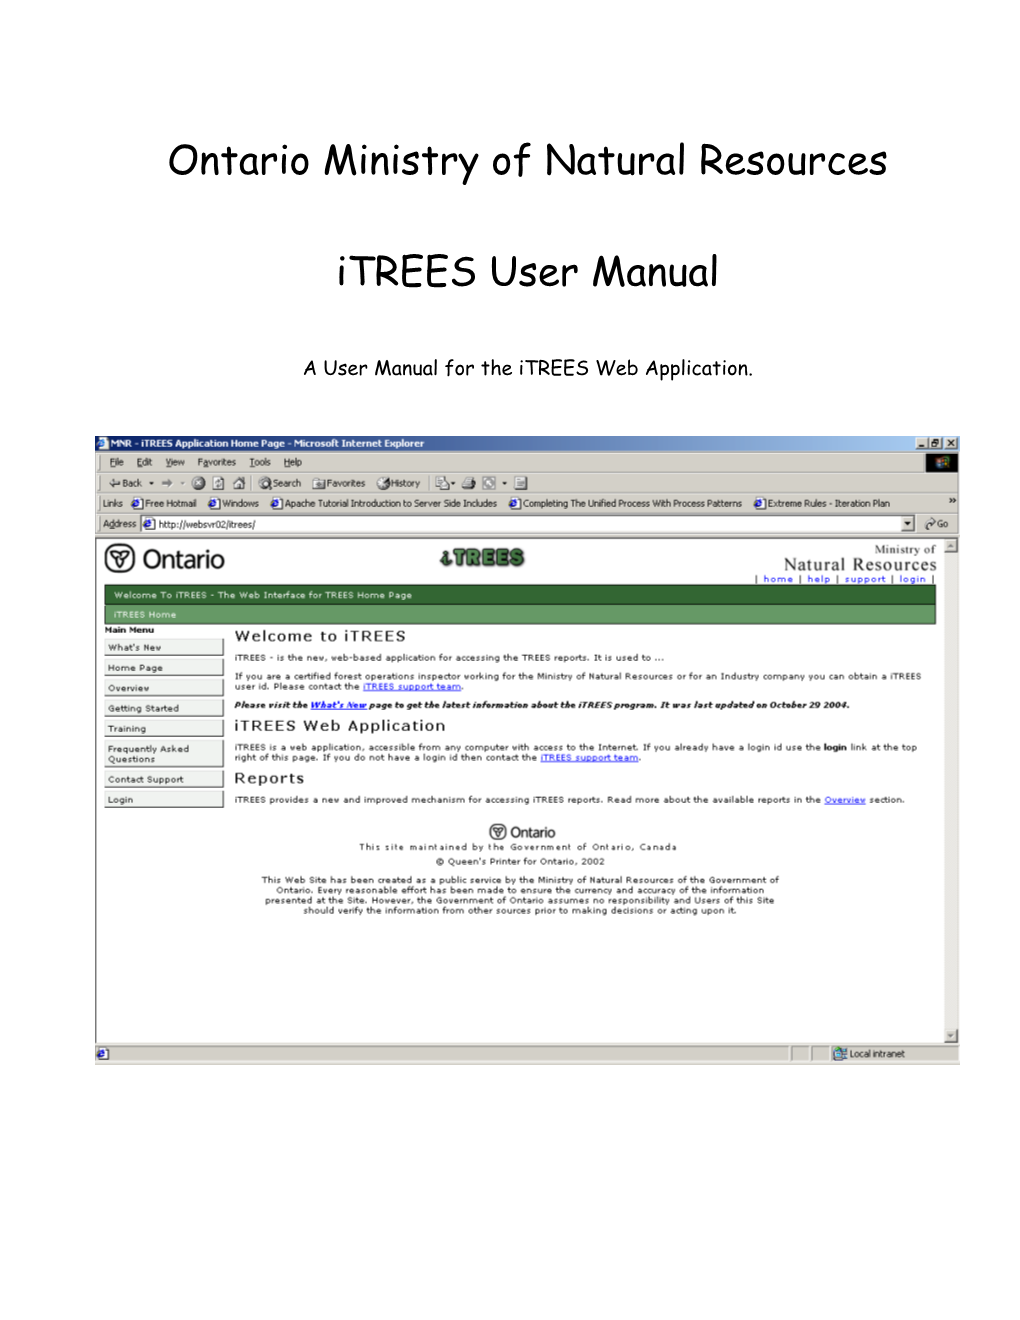 Ontario Ministry of Natural Resources